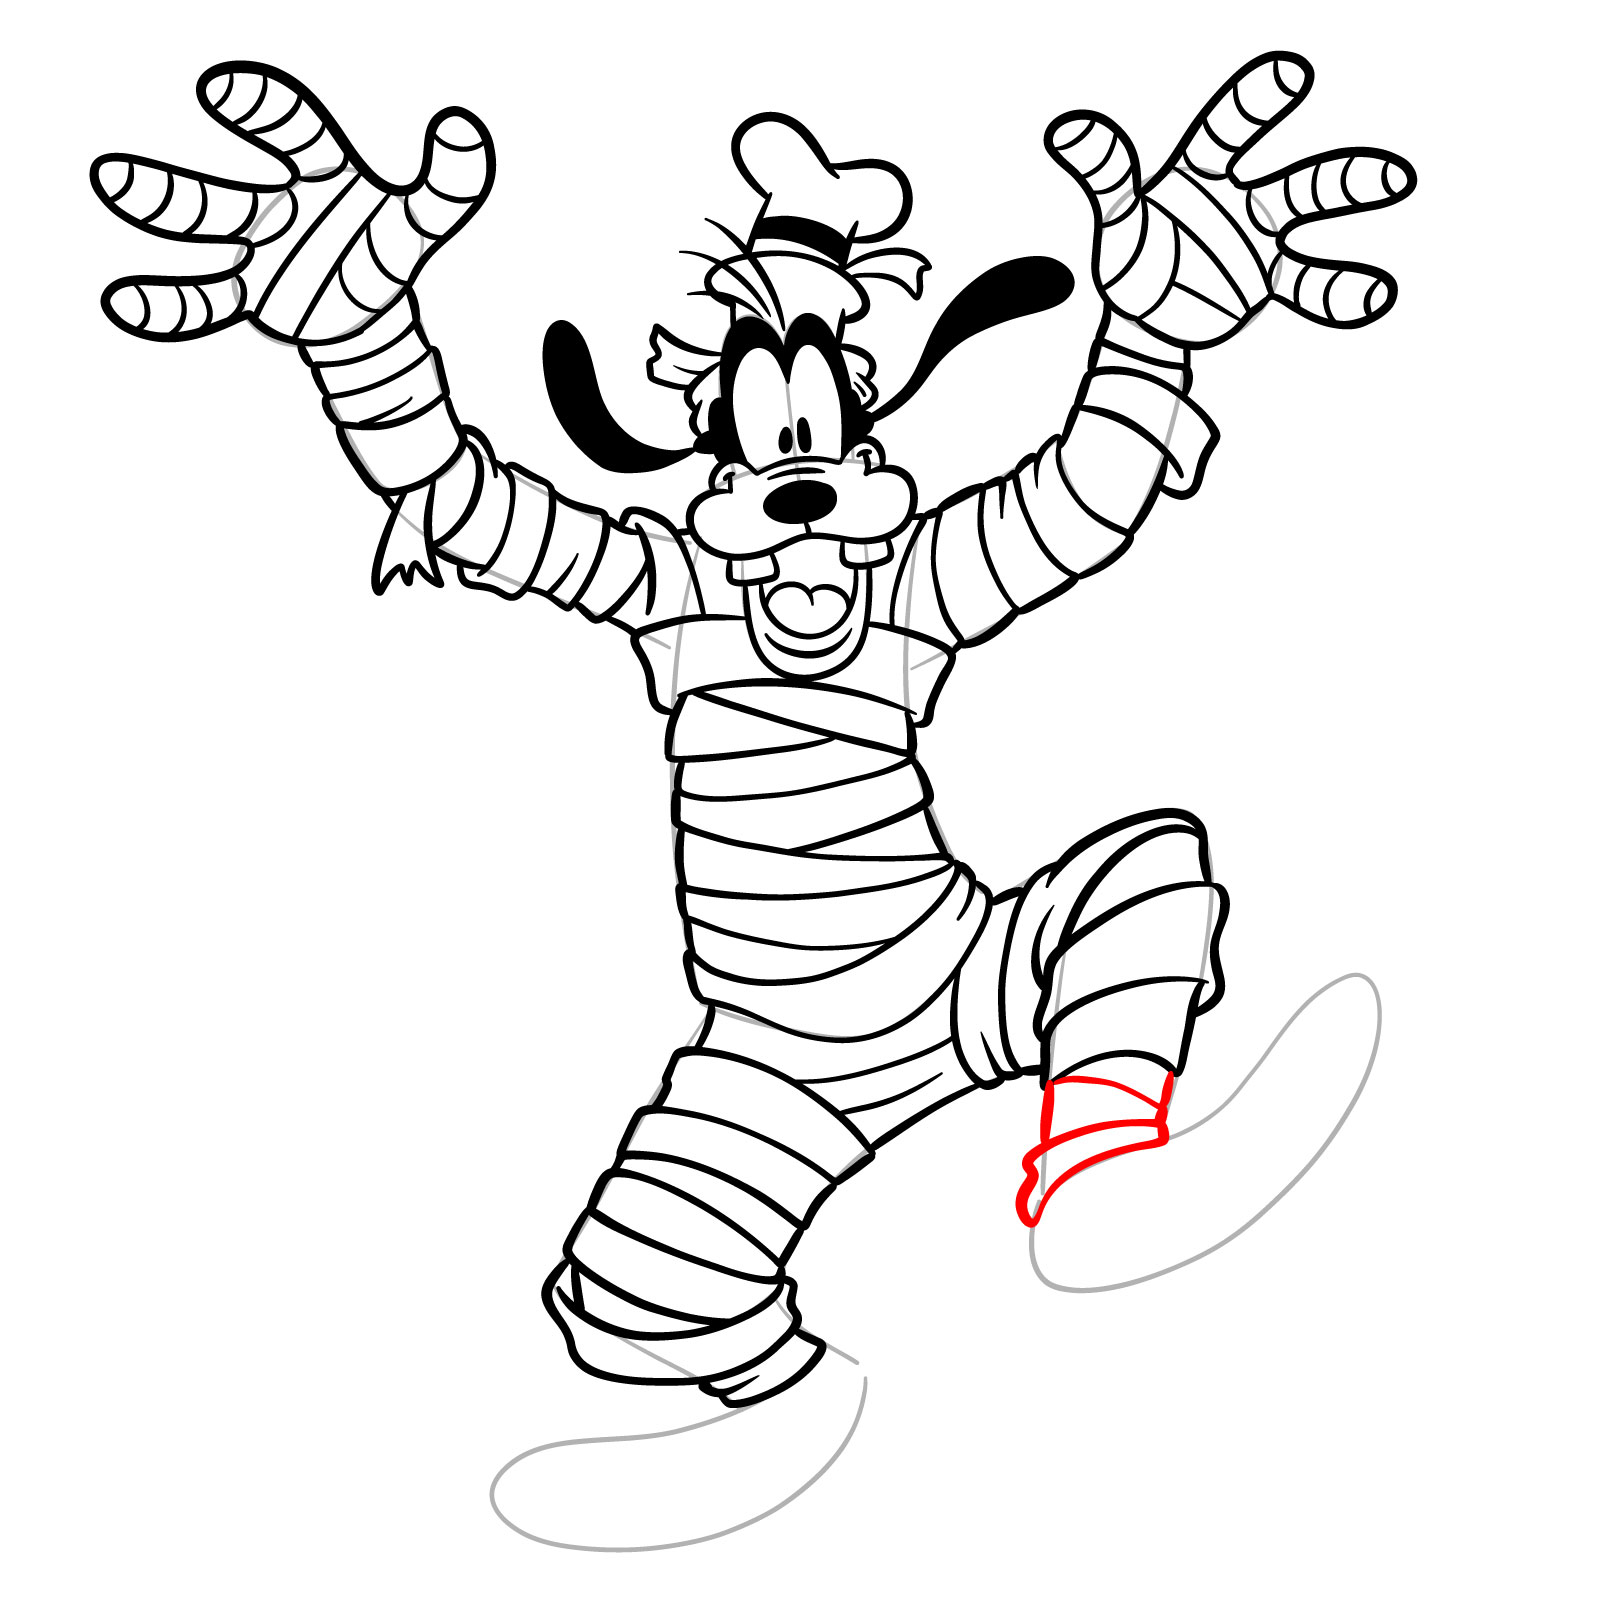 How to draw Halloween Goofy as a mummy - step 28